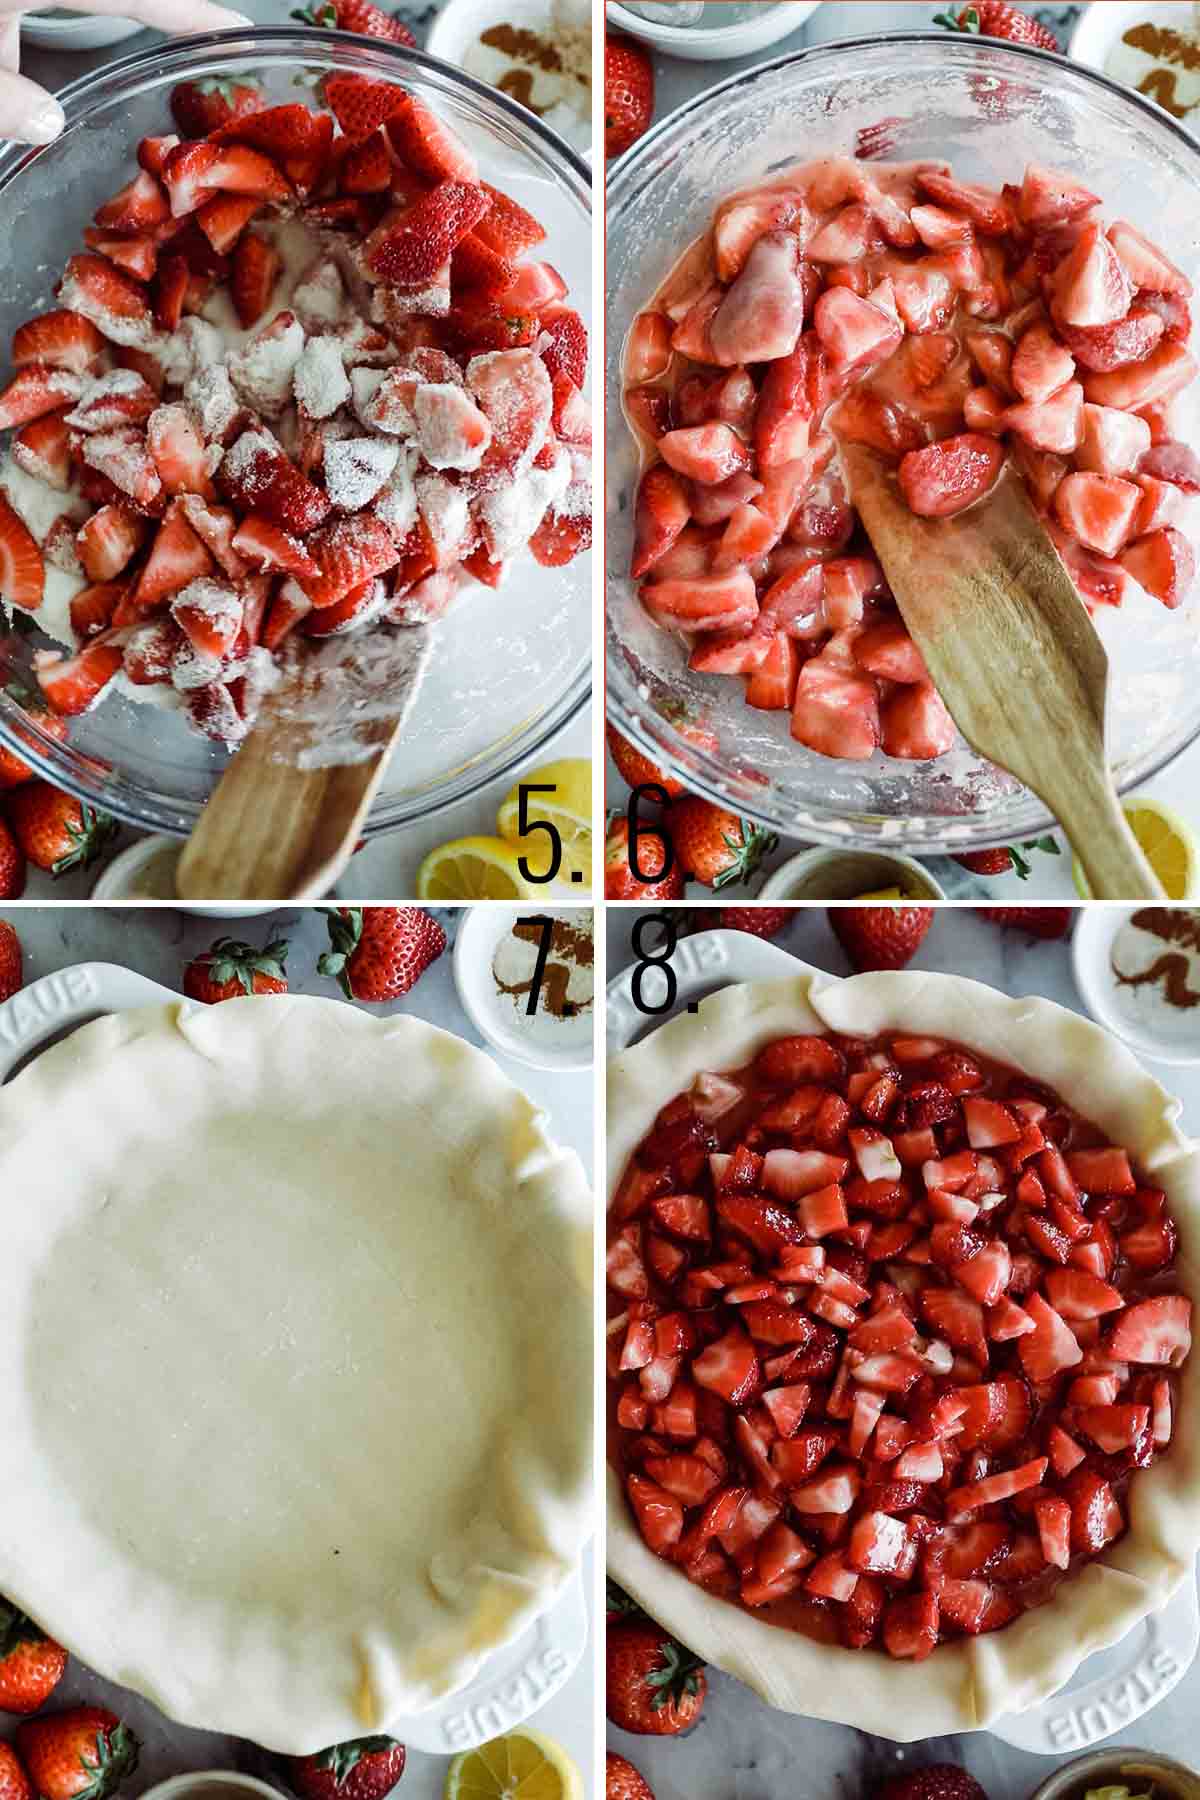 Stirring the dry ingredients together with strawberries and placed in a pie pan with pie crust. 